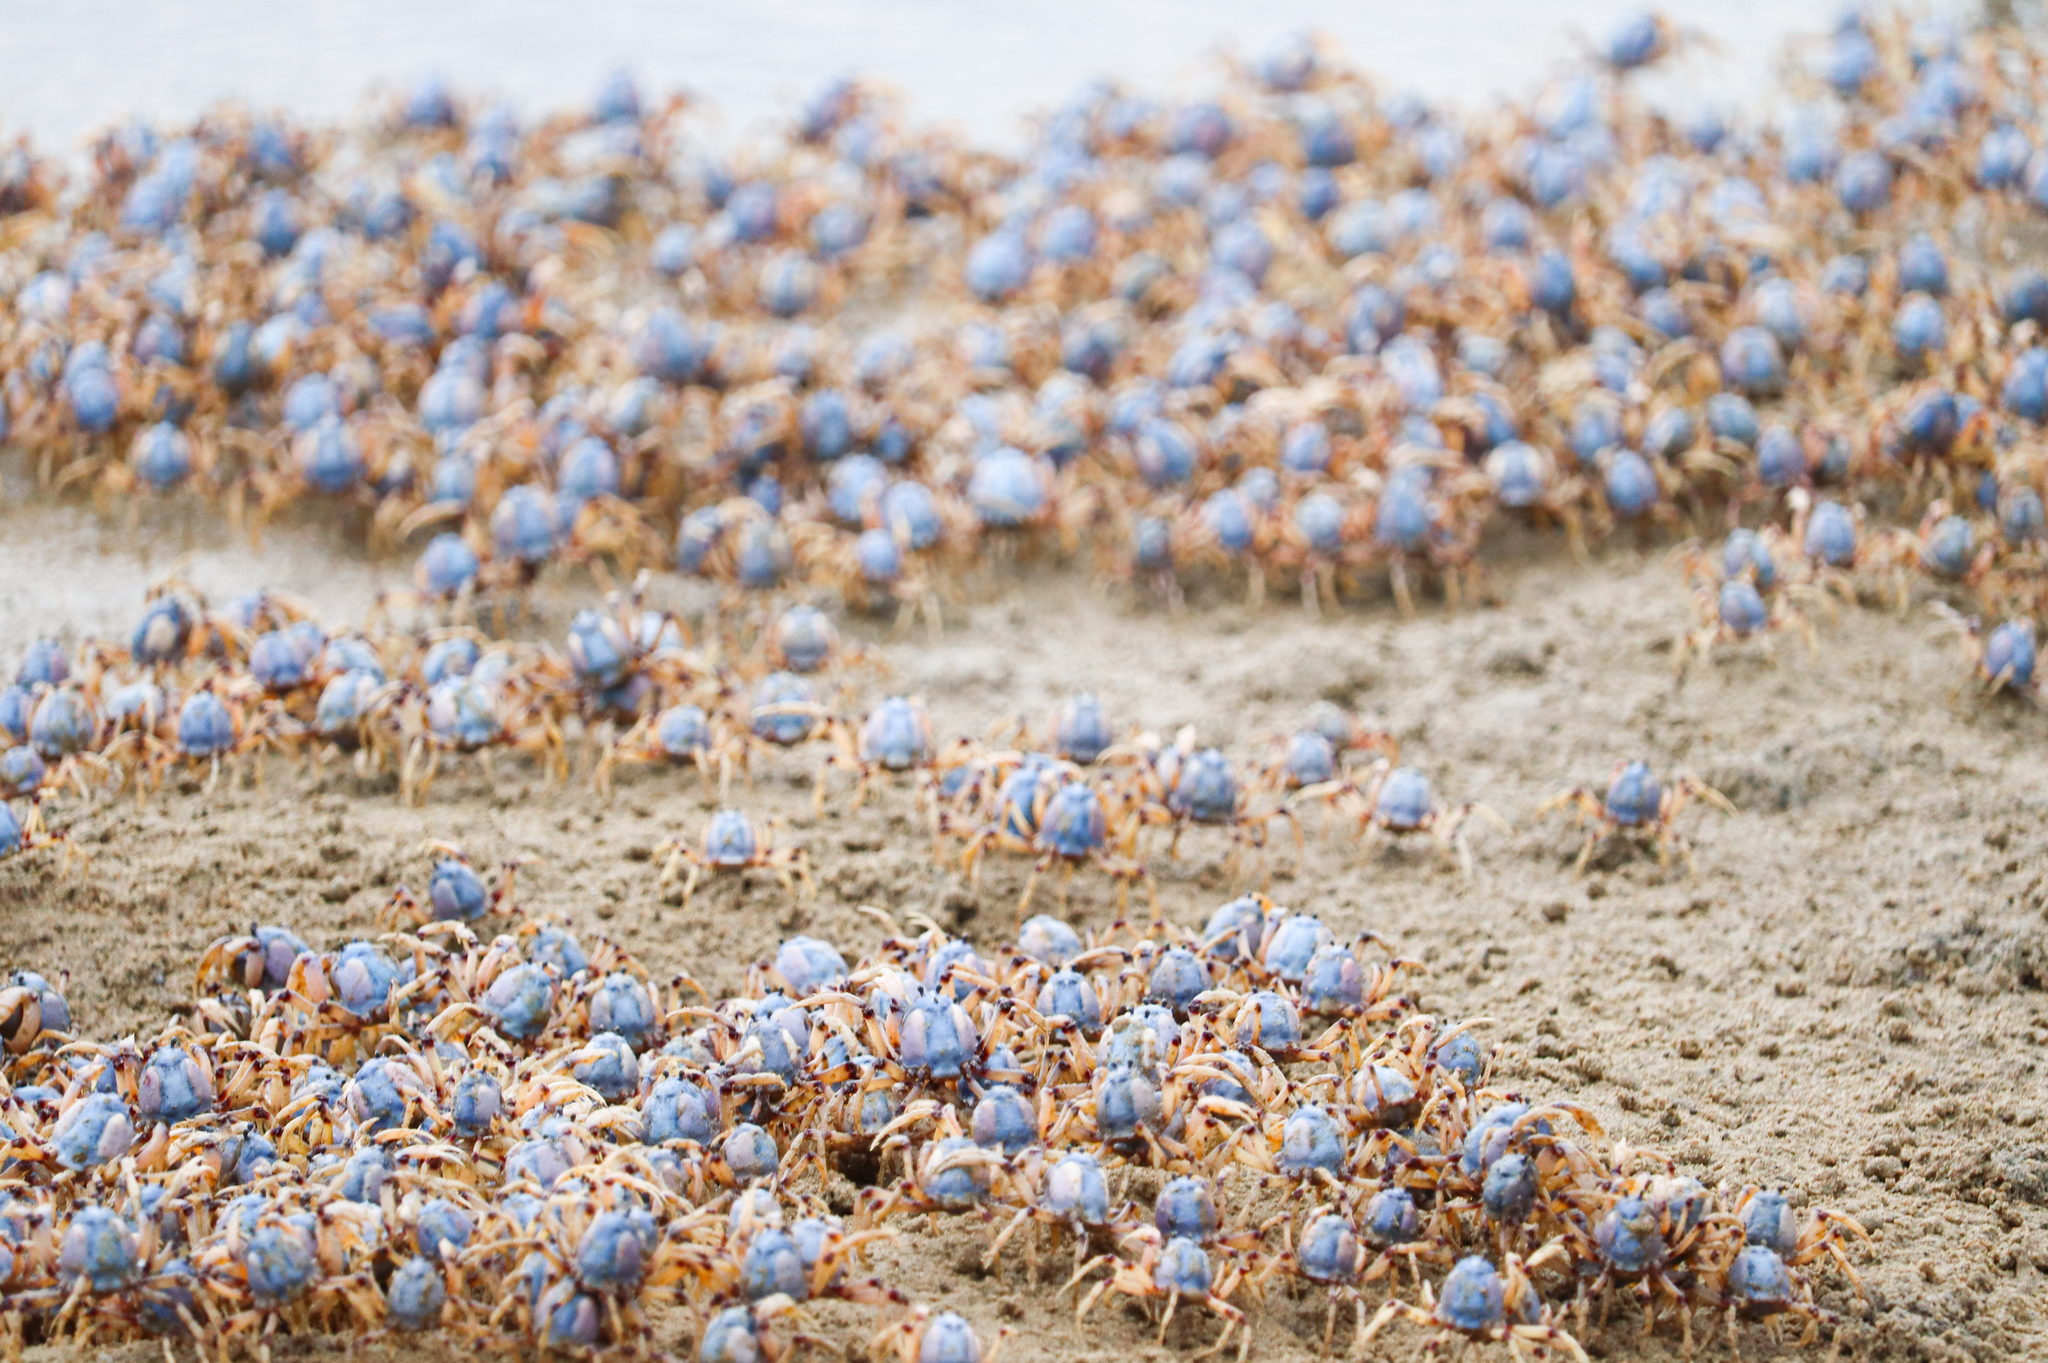 Thousands of blue solider crabs 